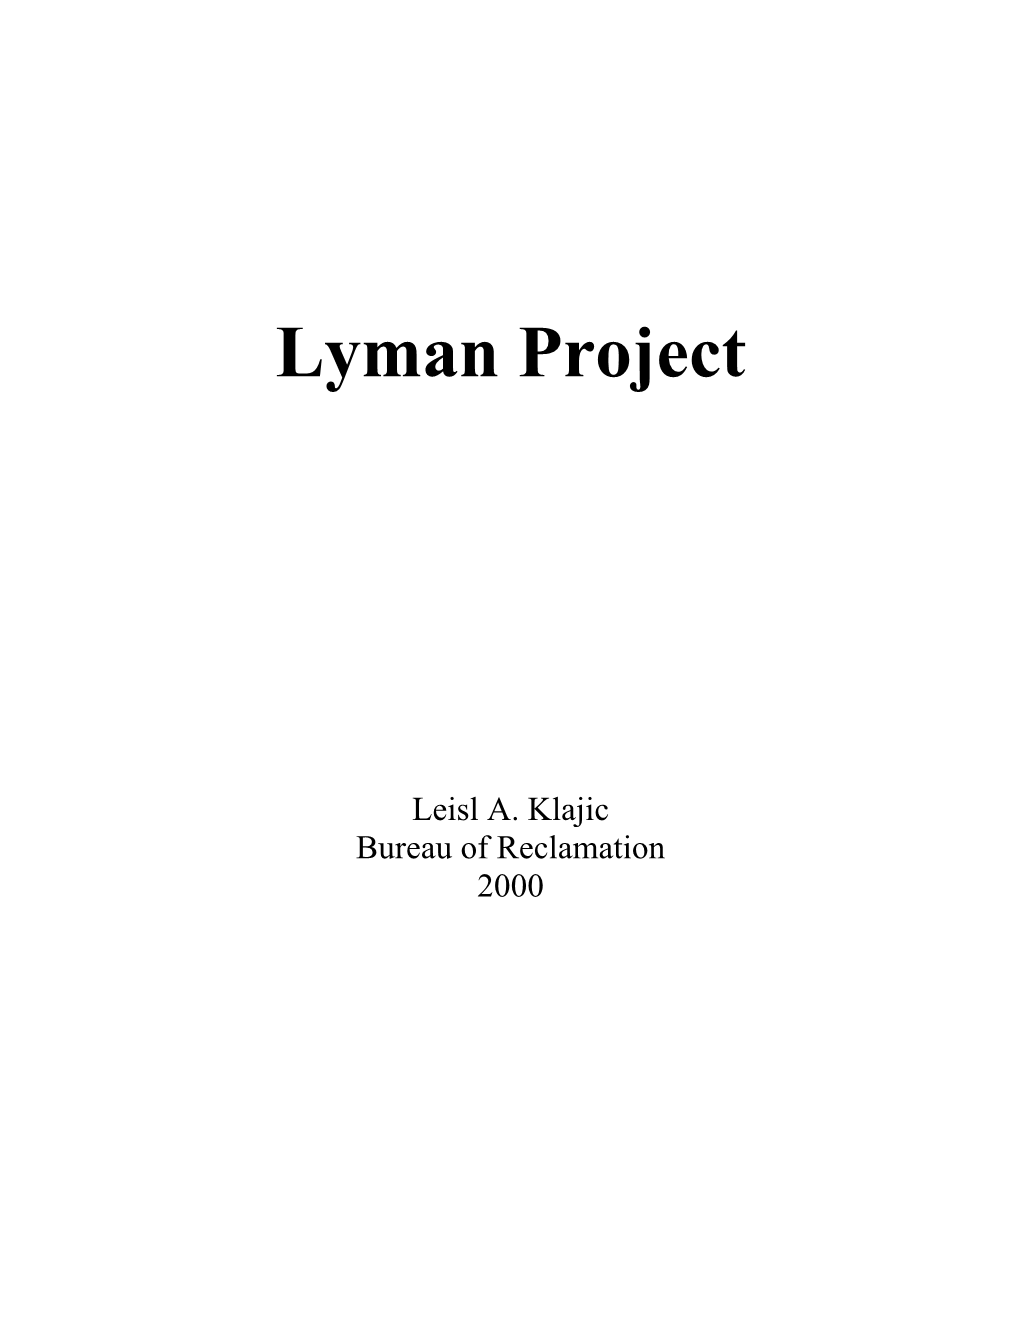 Lyman Project, Wyoming, Volume I (Denver: United States Government Printing Office, 1963), 1, 8